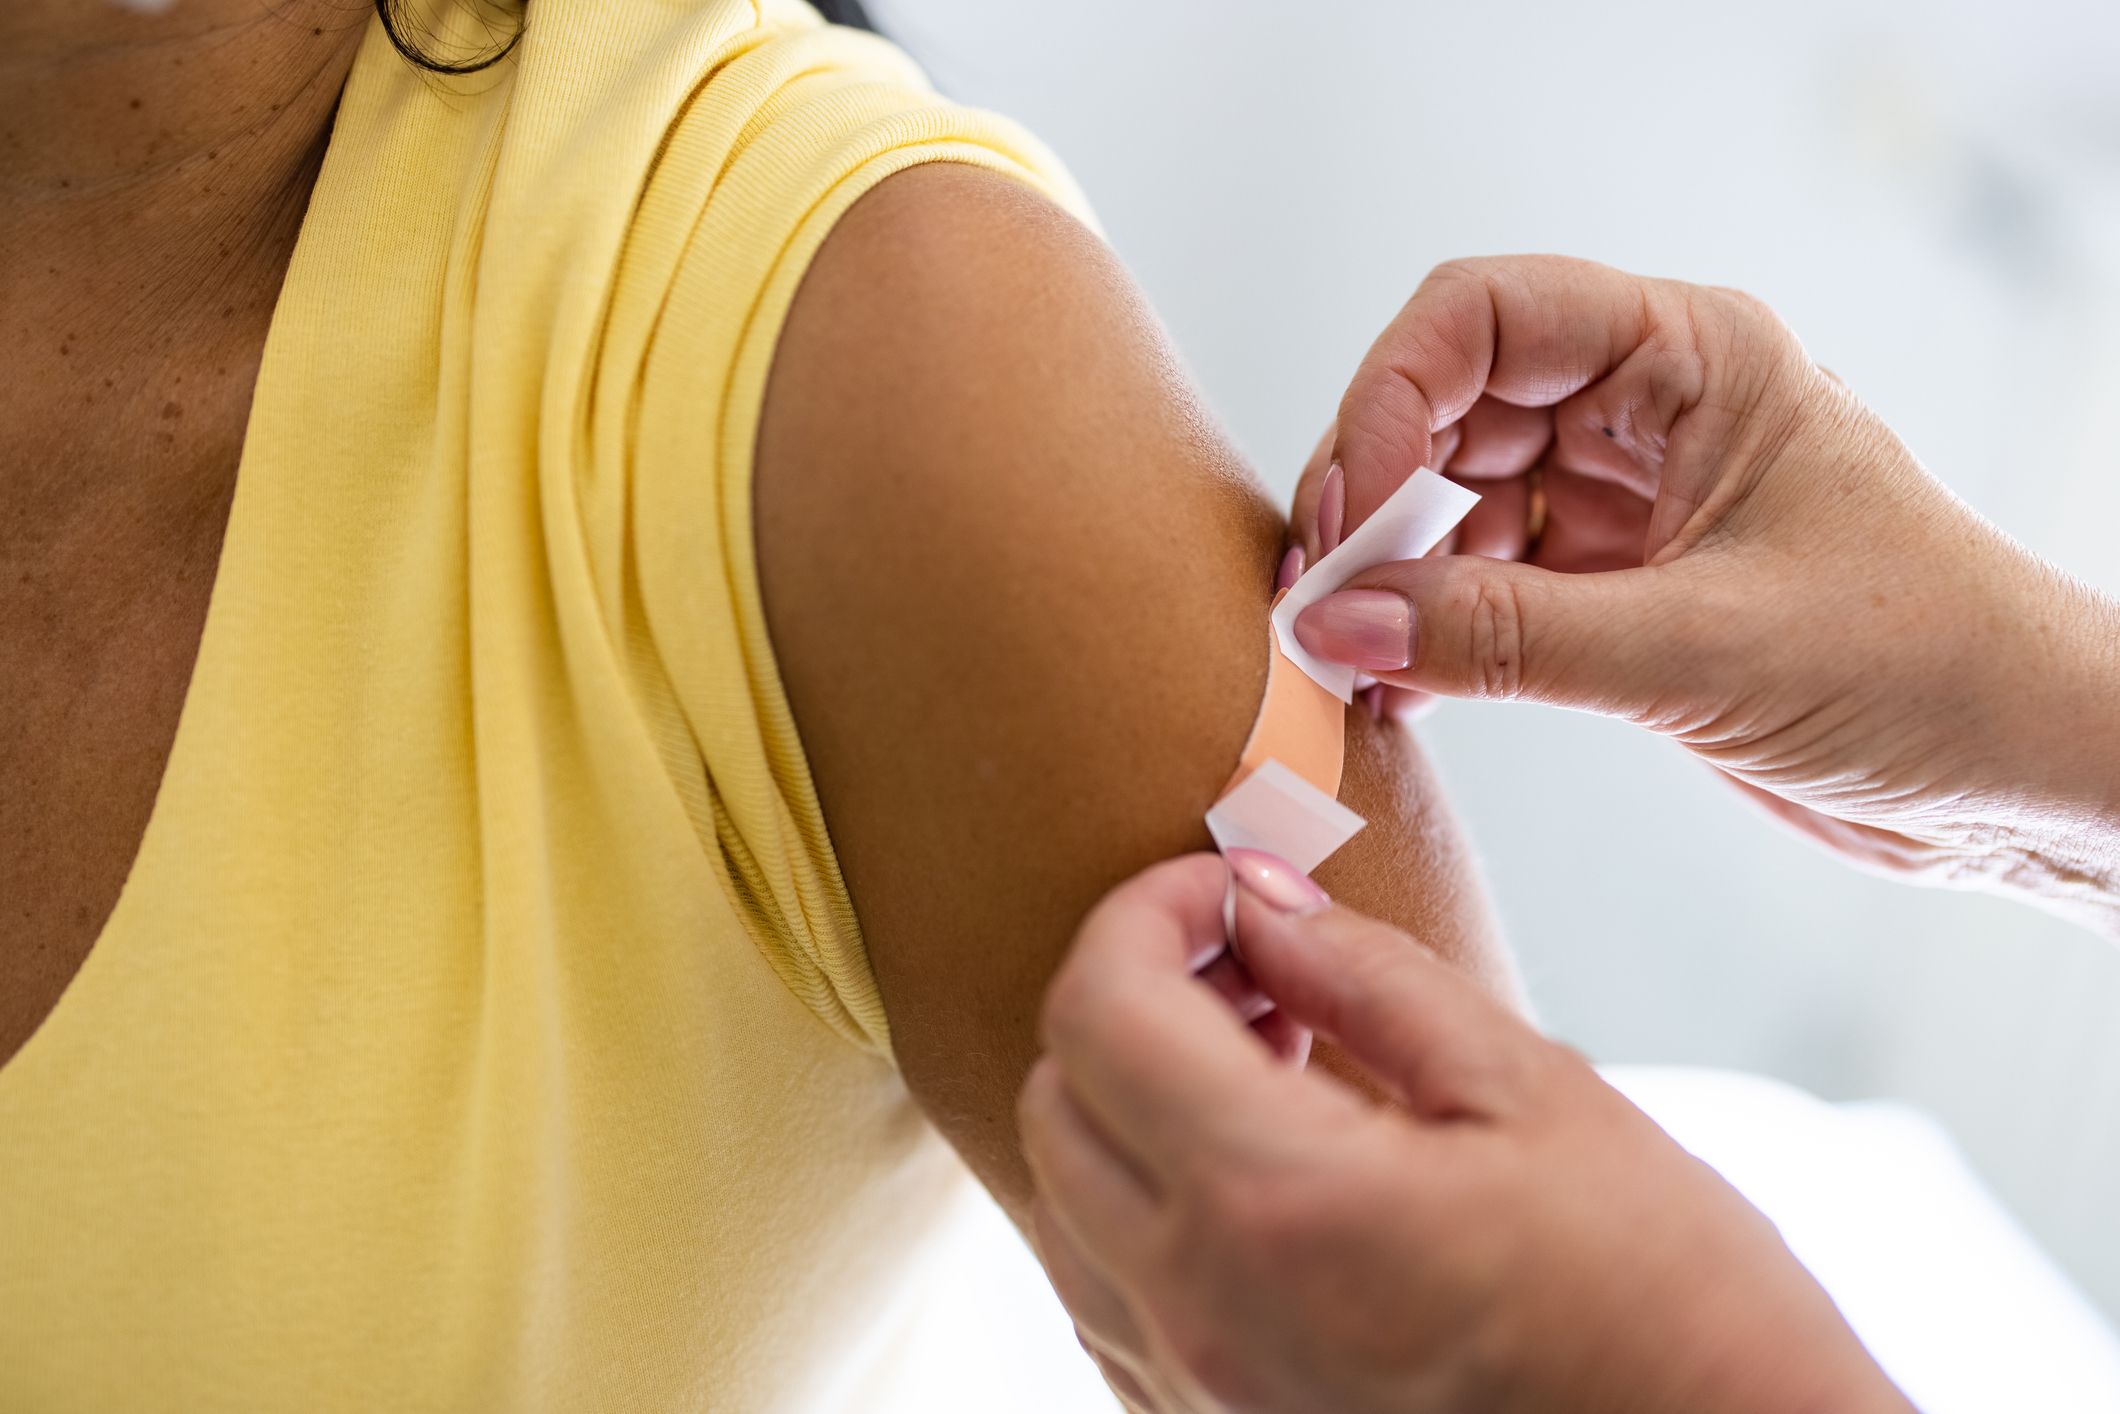 5 Things The COVID-19 Vaccine Can Prevent